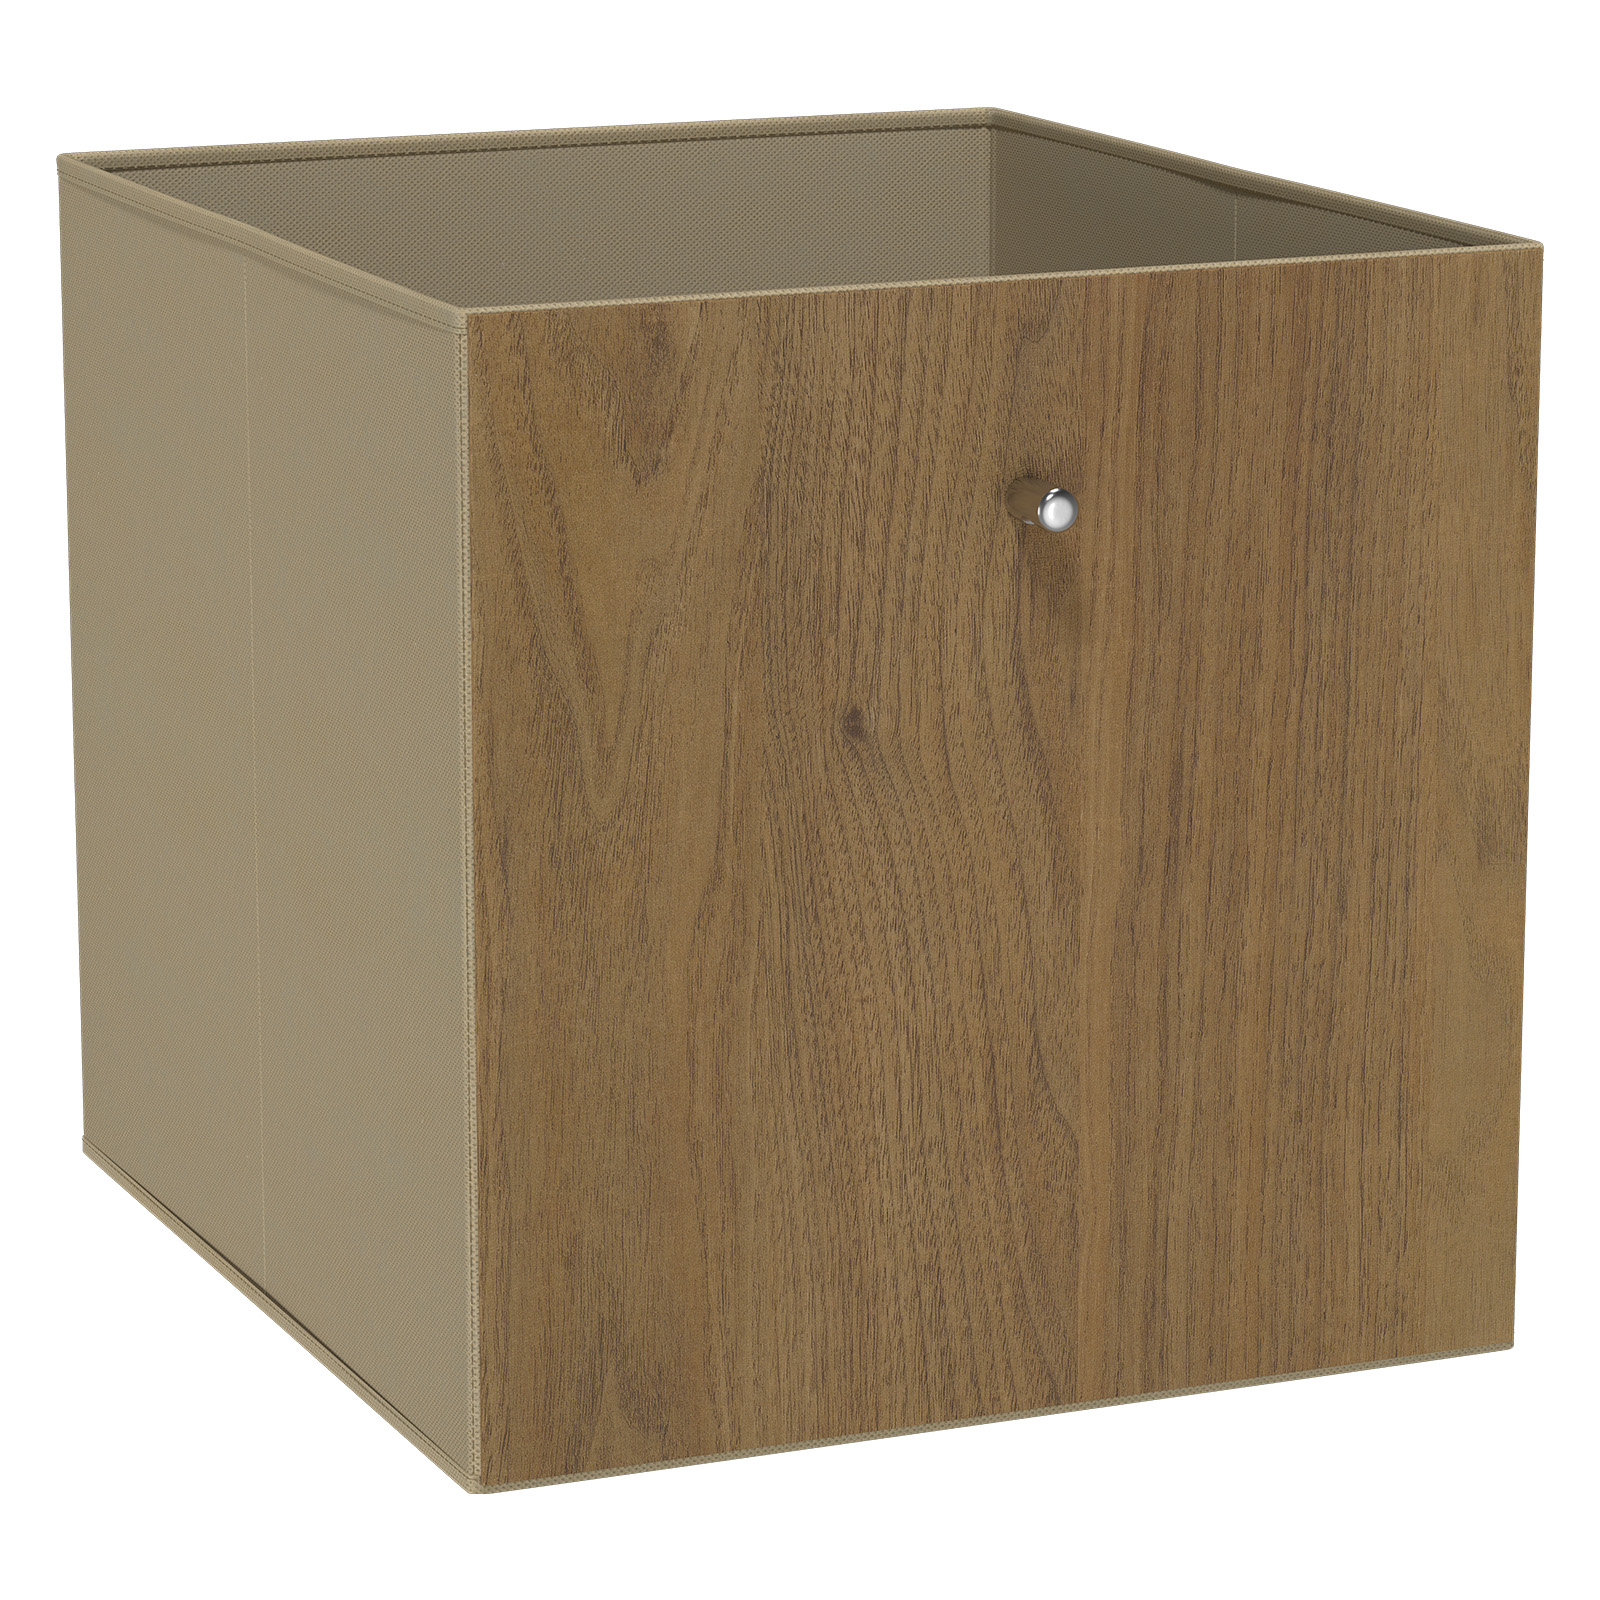 Clever Cube Walnut Timber Front Insert